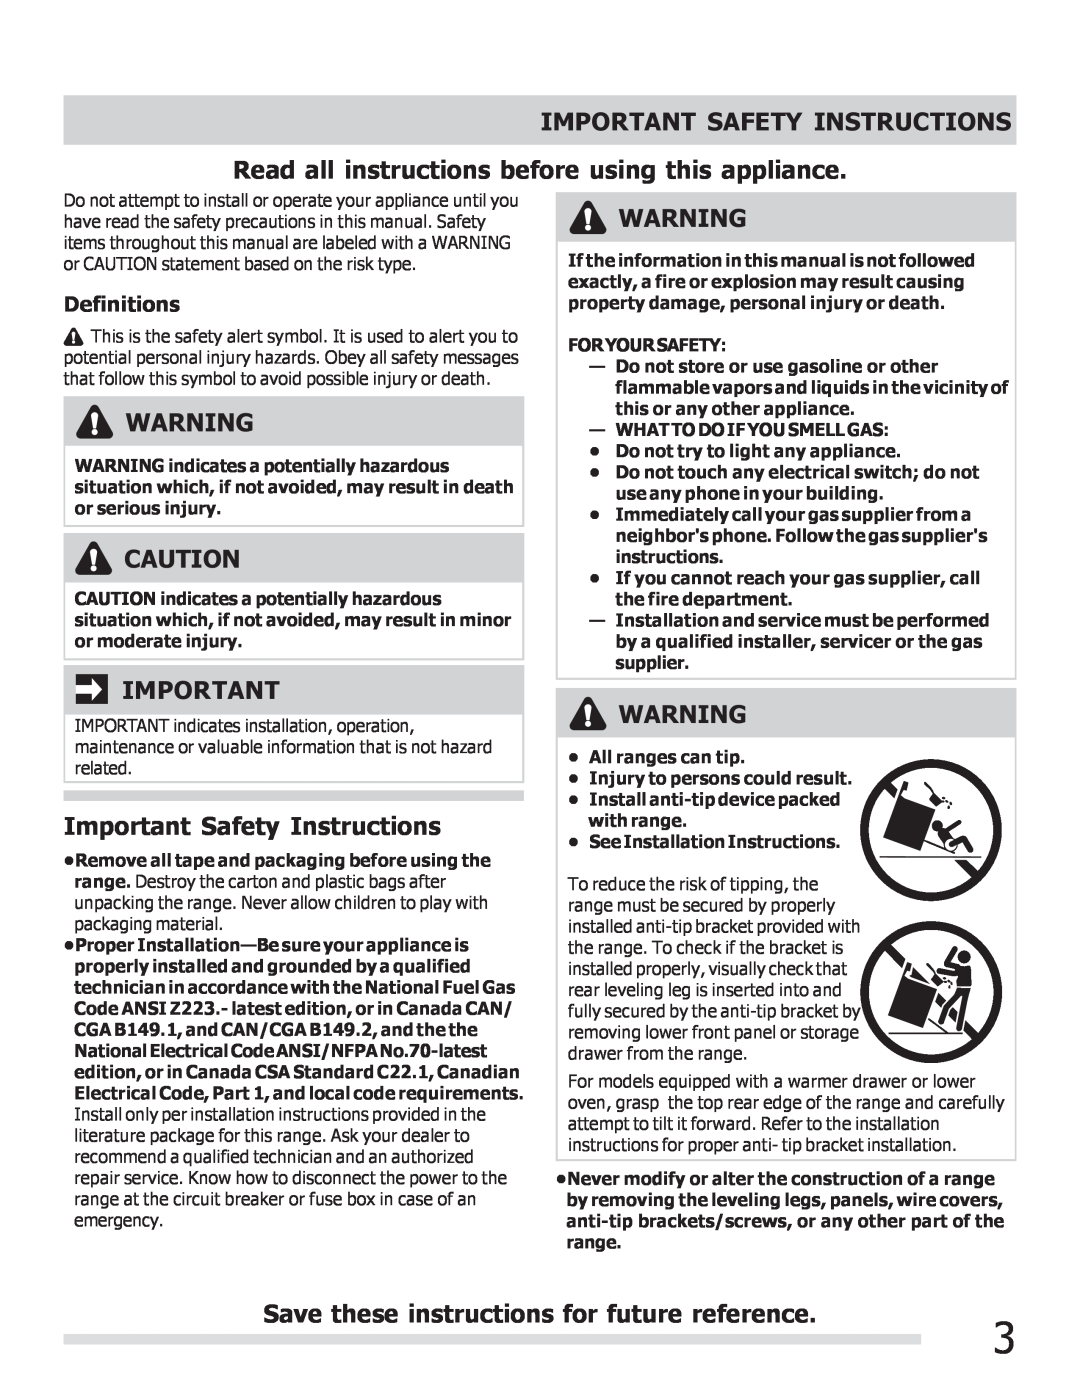 Frigidaire FGGF3056KF Important Safety Instructions, Read all instructions before using this appliance, Definitions 